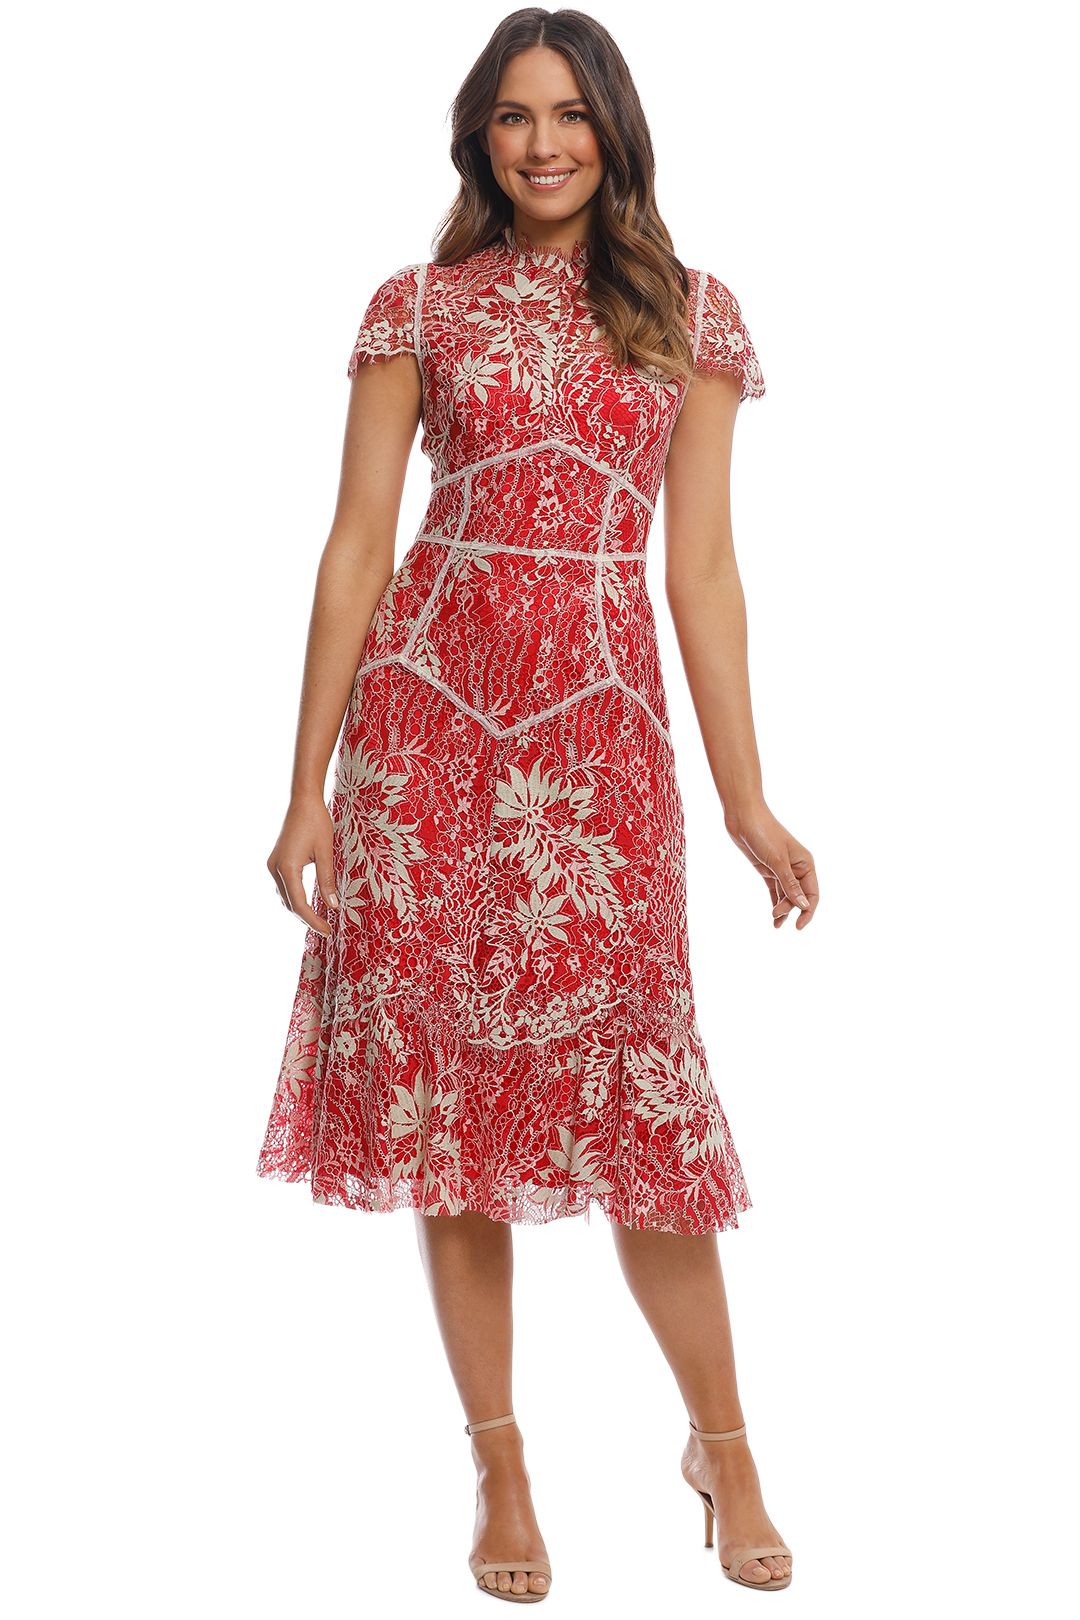 Moss and Spy - Annika High Neck Dress - Red - Front